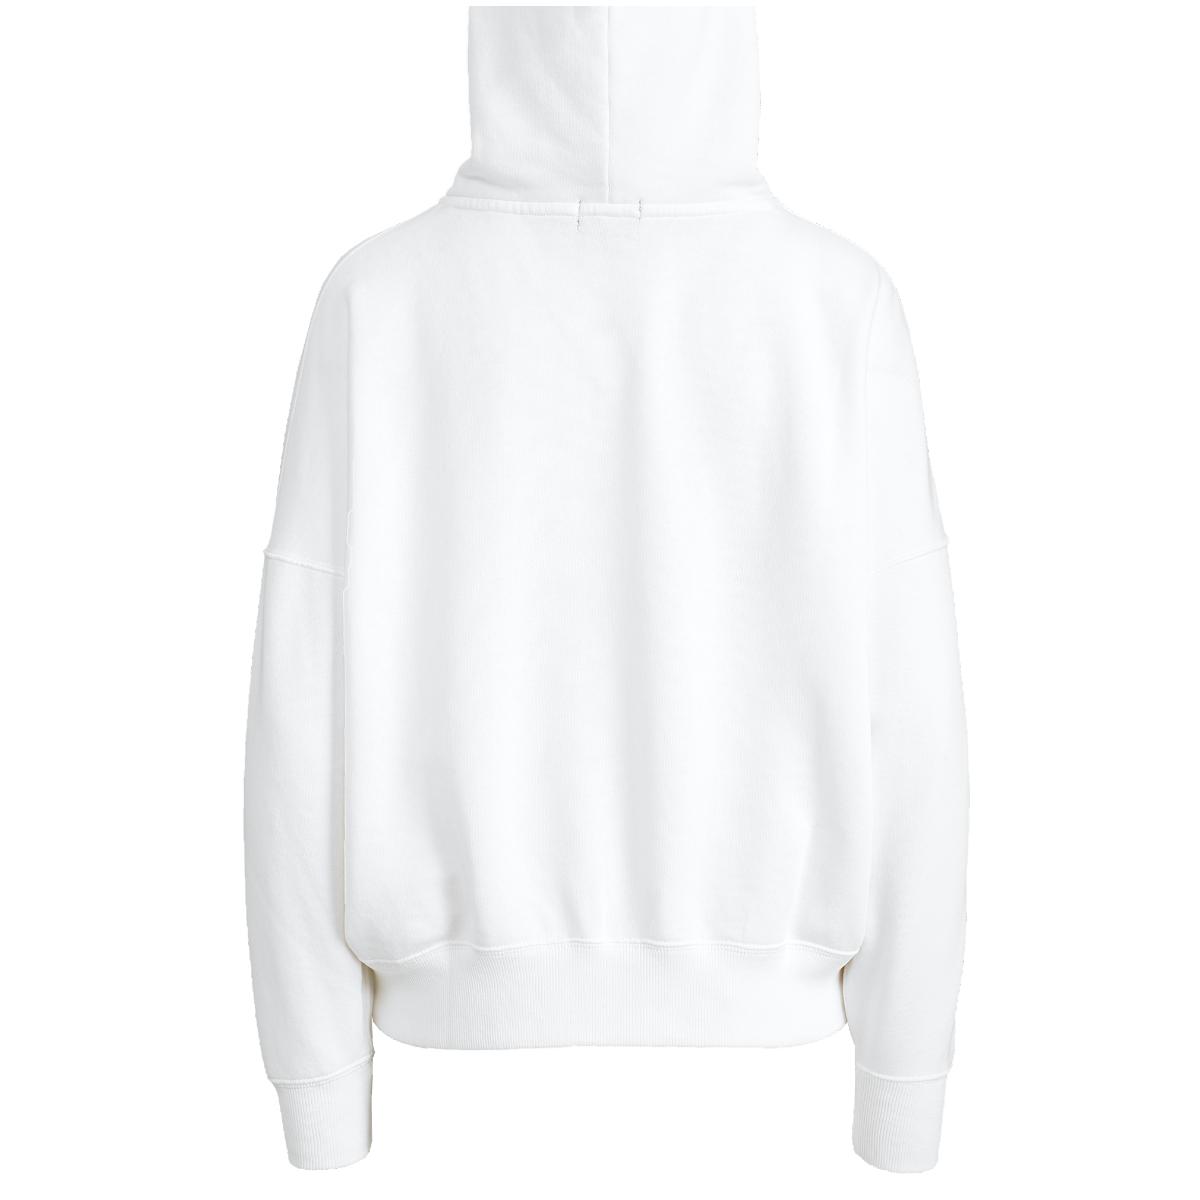 FRAME Men's Double-Face Pullover Hoodie